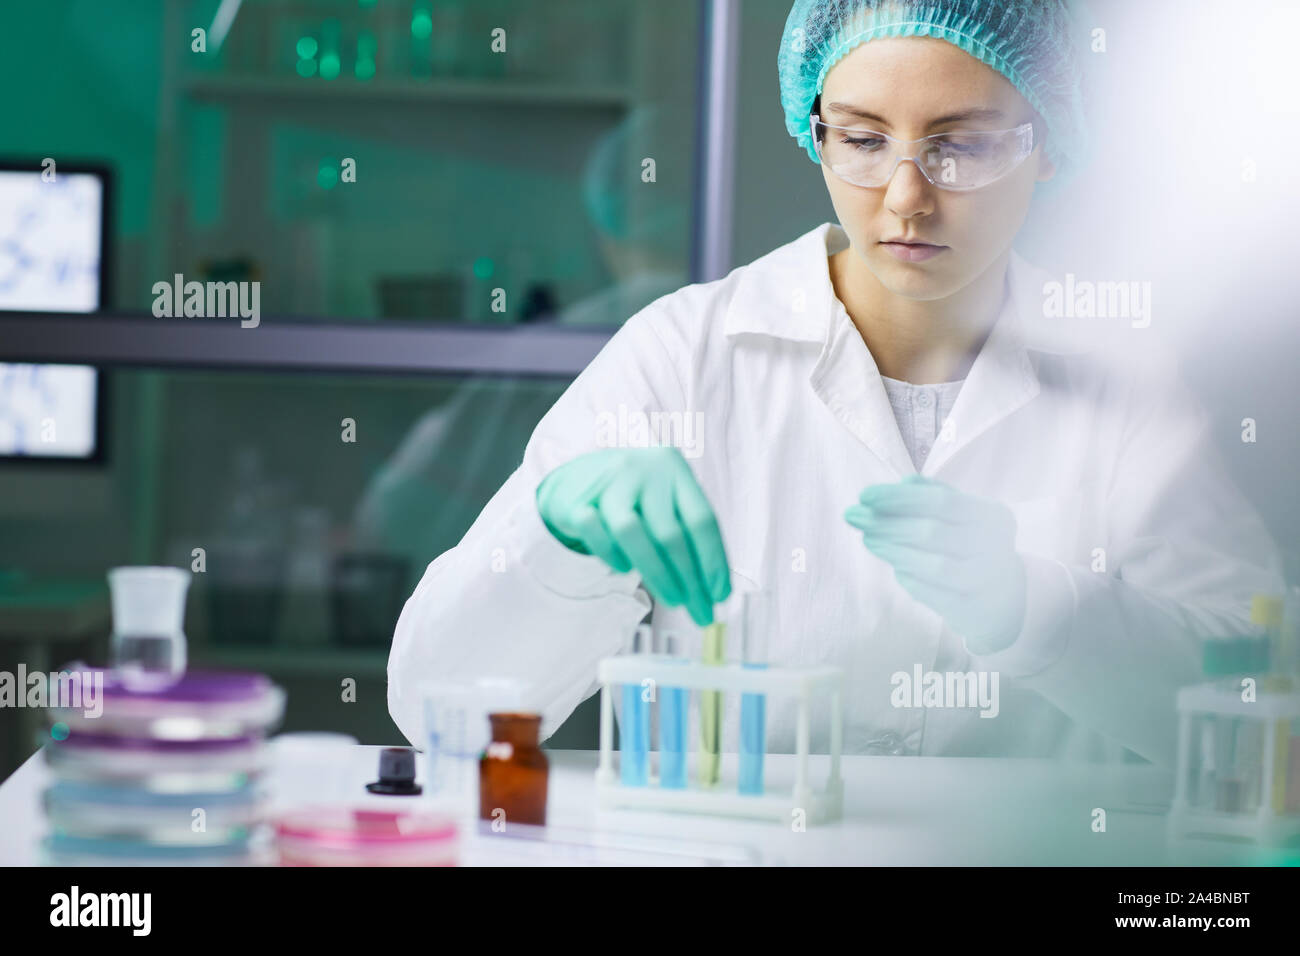 Portrait of young woman taking test tube with colored liquid while working on research in medical laboratory, copy space Stock Photo